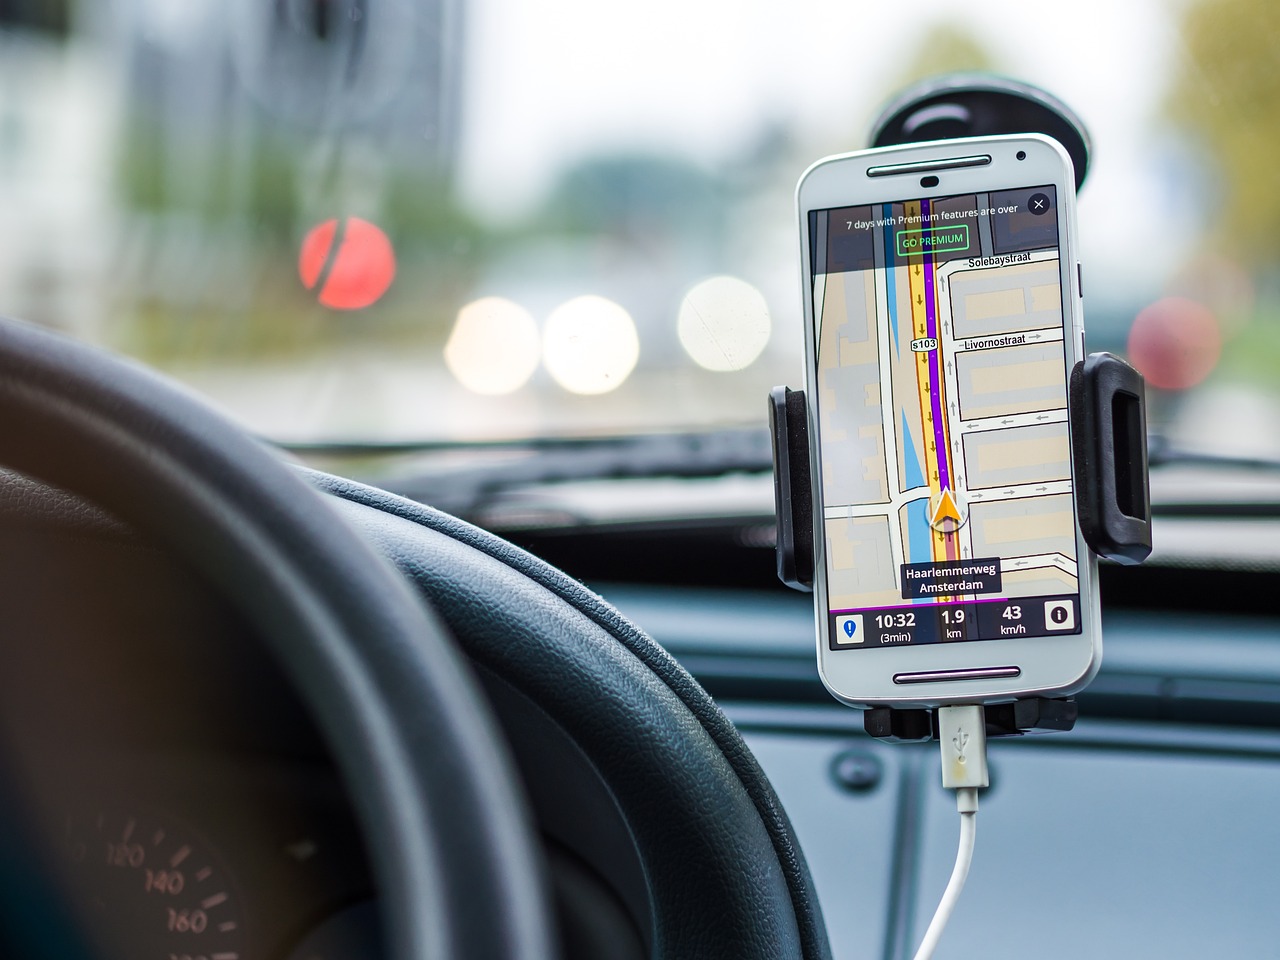 How to GPS Track a Cell Phone